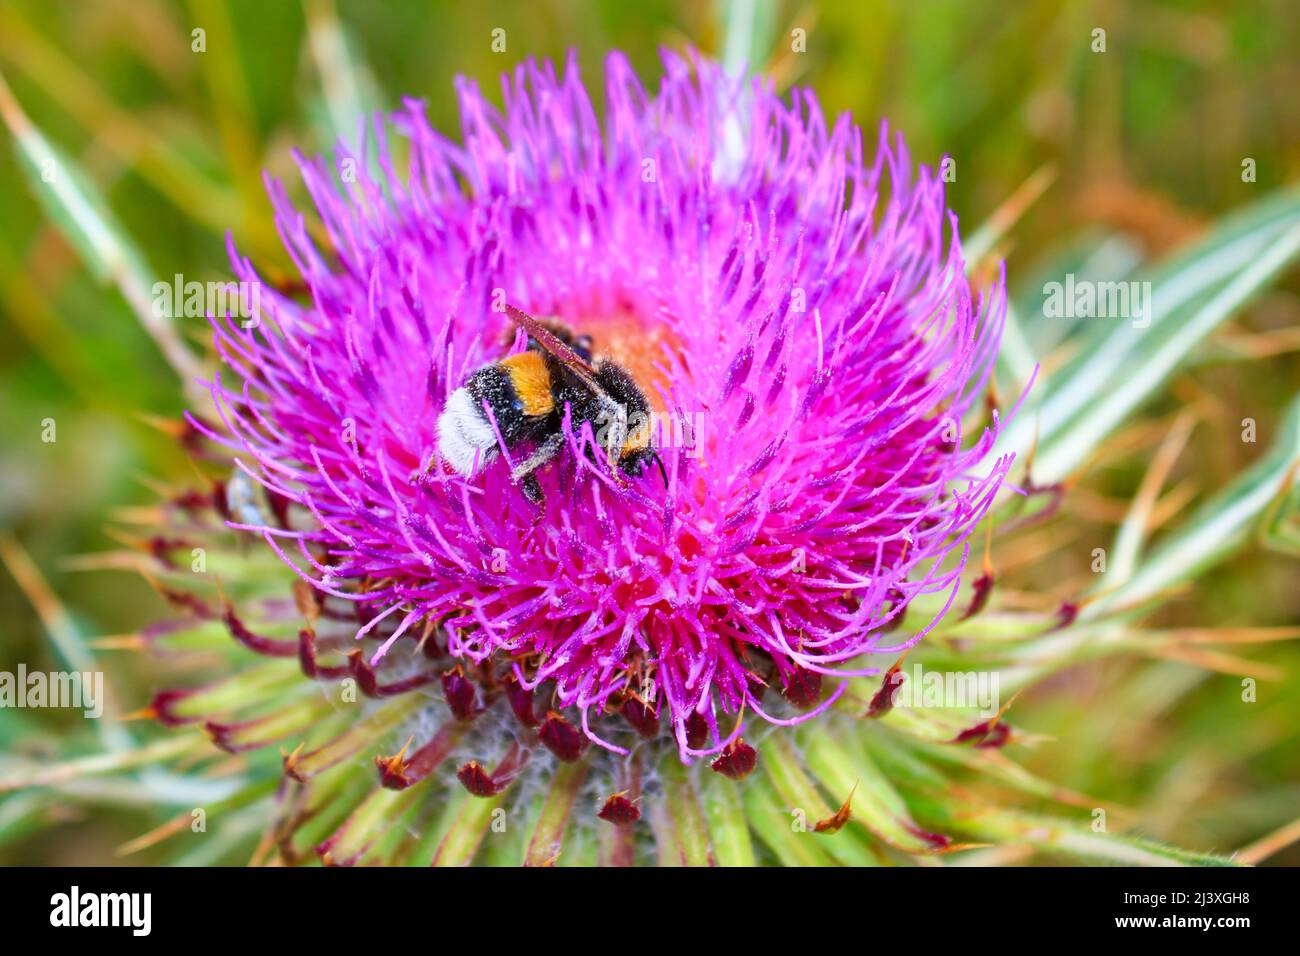 Honey bee drinking nectar at flower-Cirsium tuberosum is a species of flowering plant belonging to the family Asteraceae. Its native range is Europe. Stock Photo